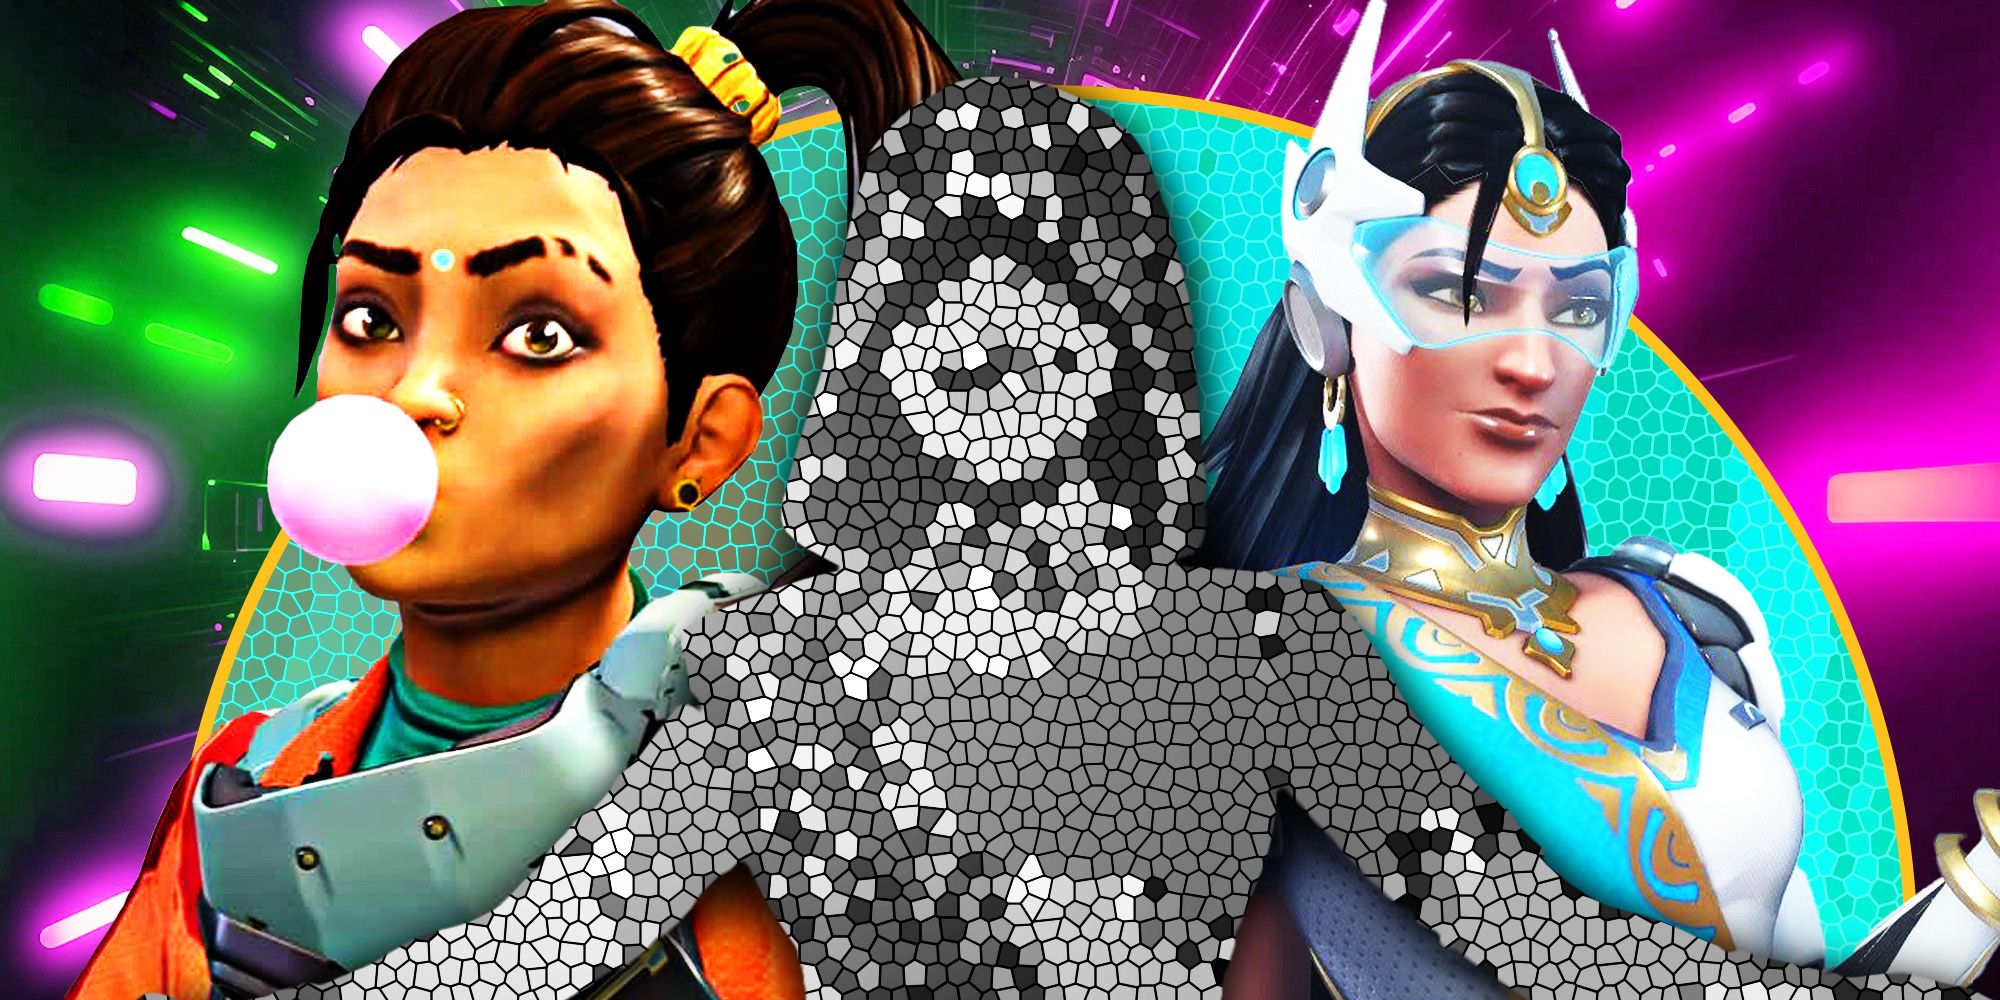 Symmetra and Rampart on opposite sides of a gray figure with a hood that's been pixelated out.